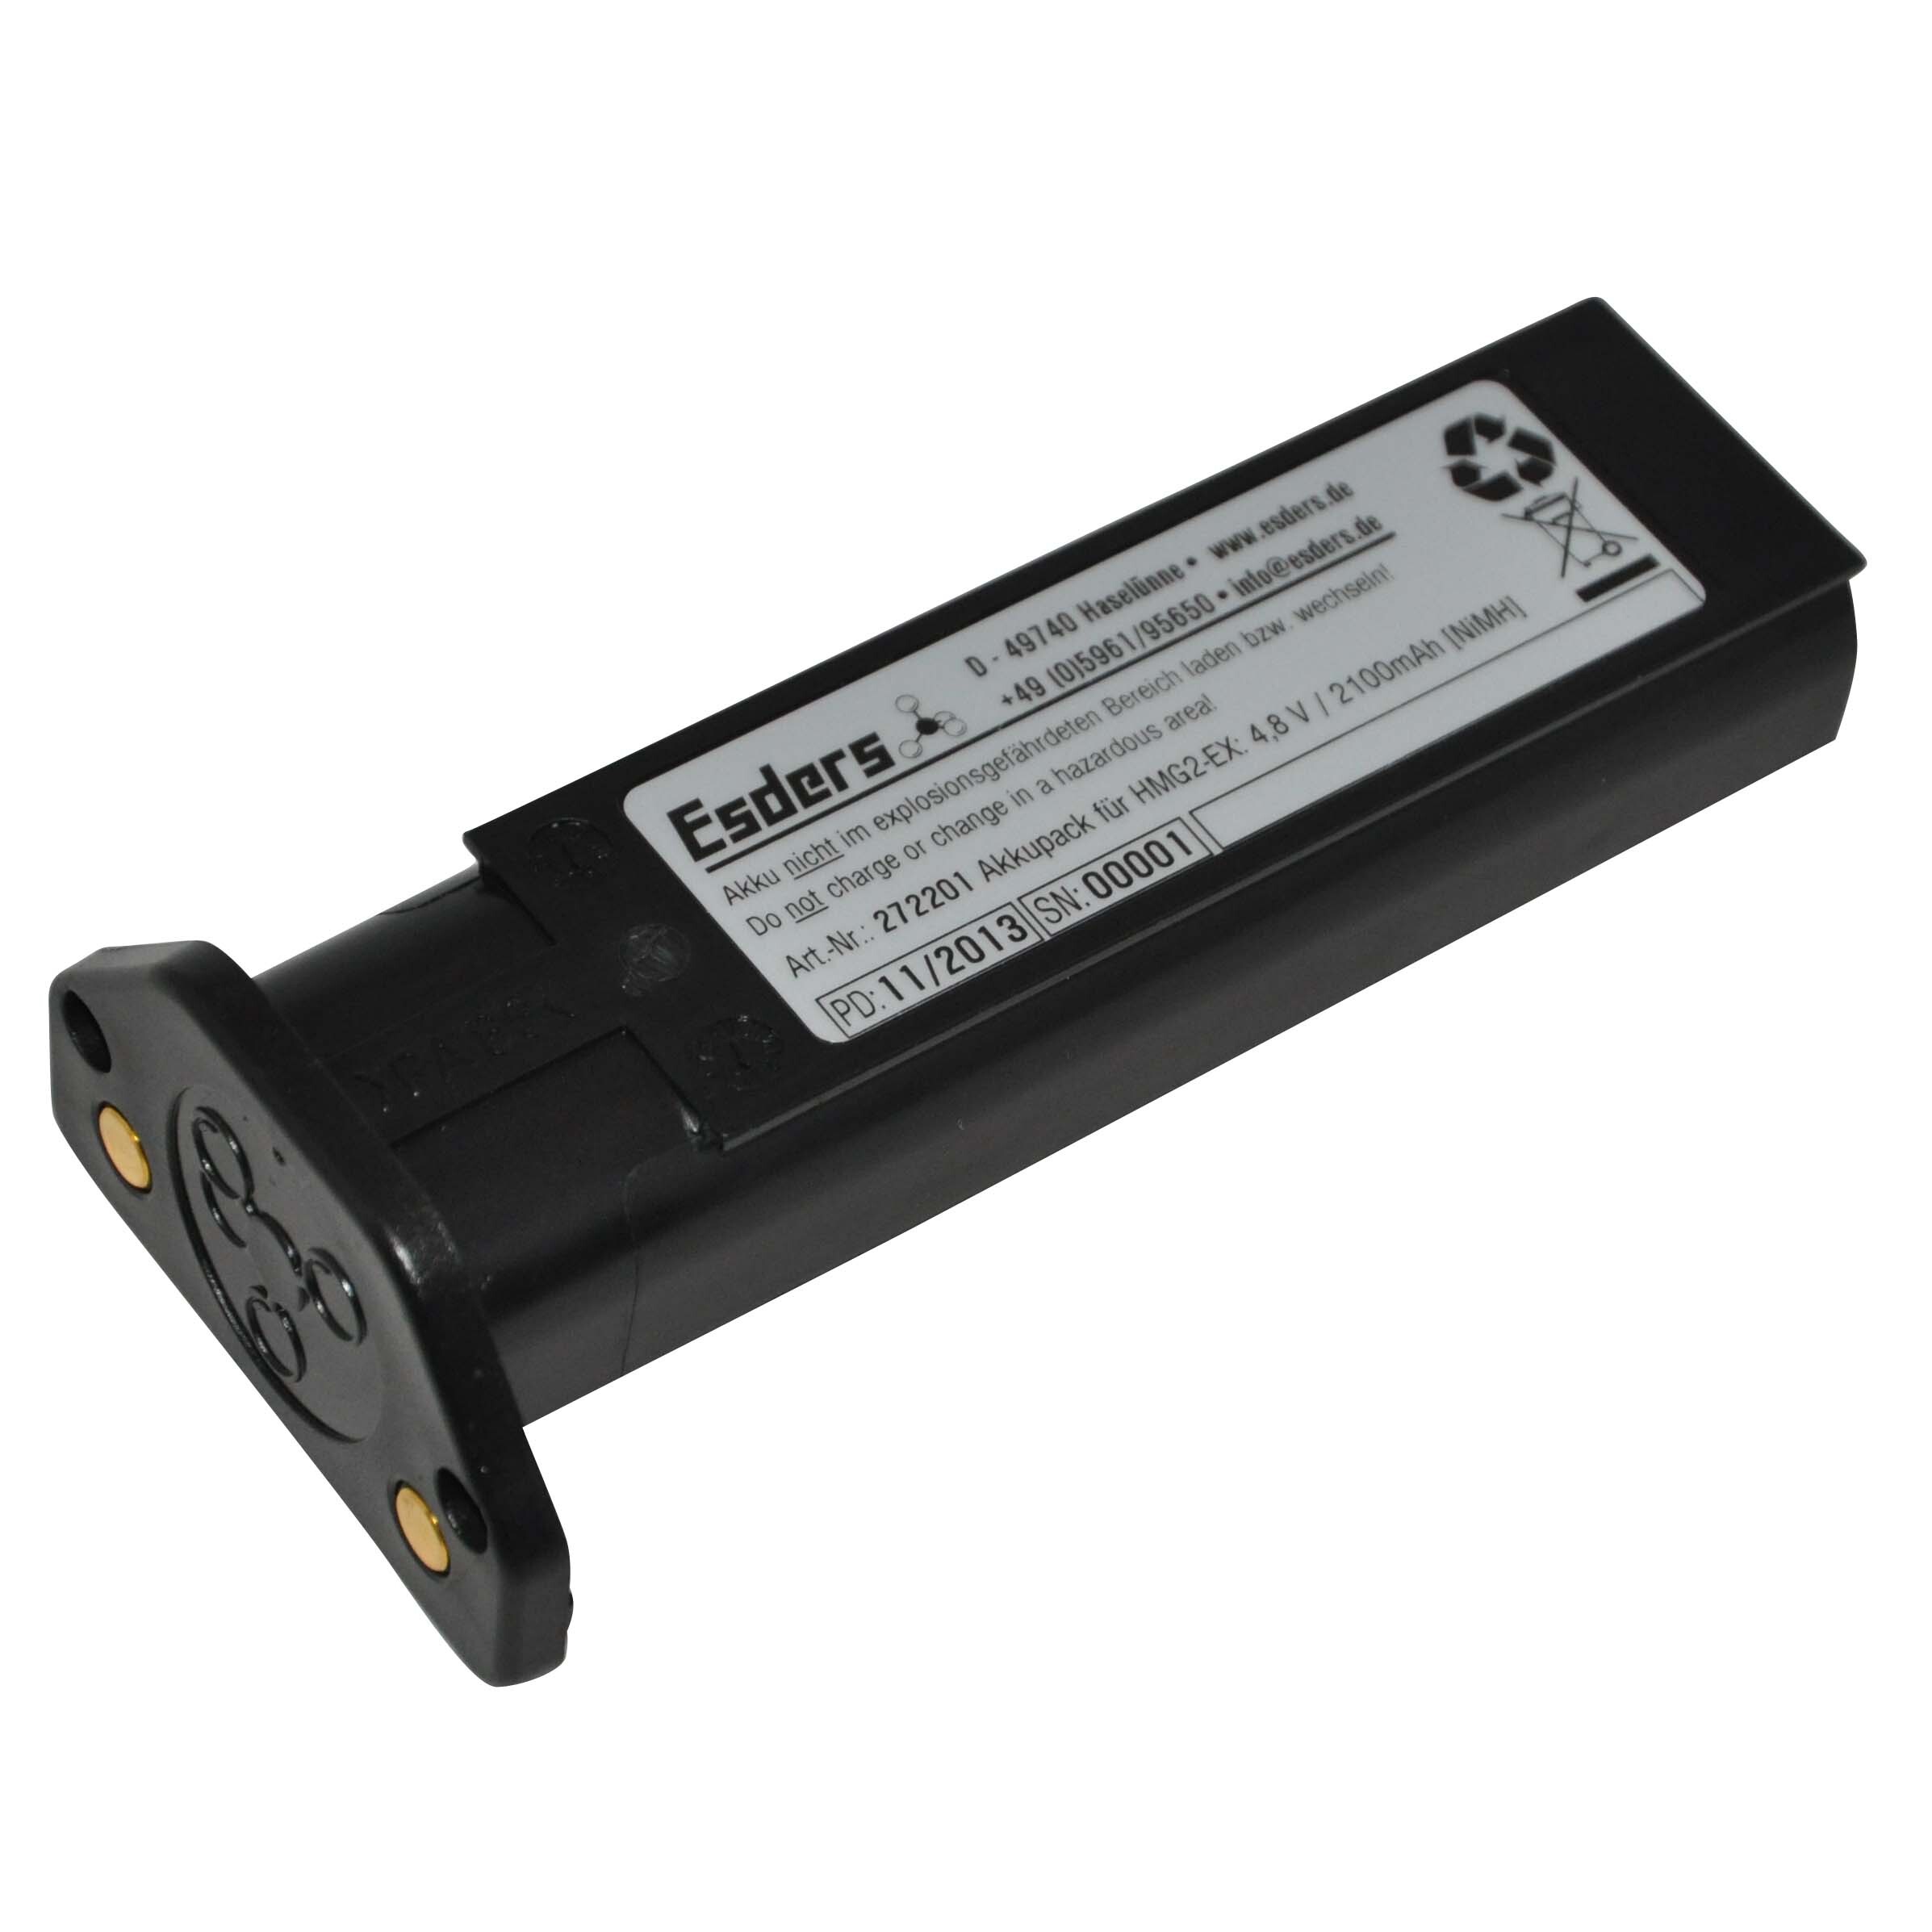 Rechargeable battery pack for HMG2 EX